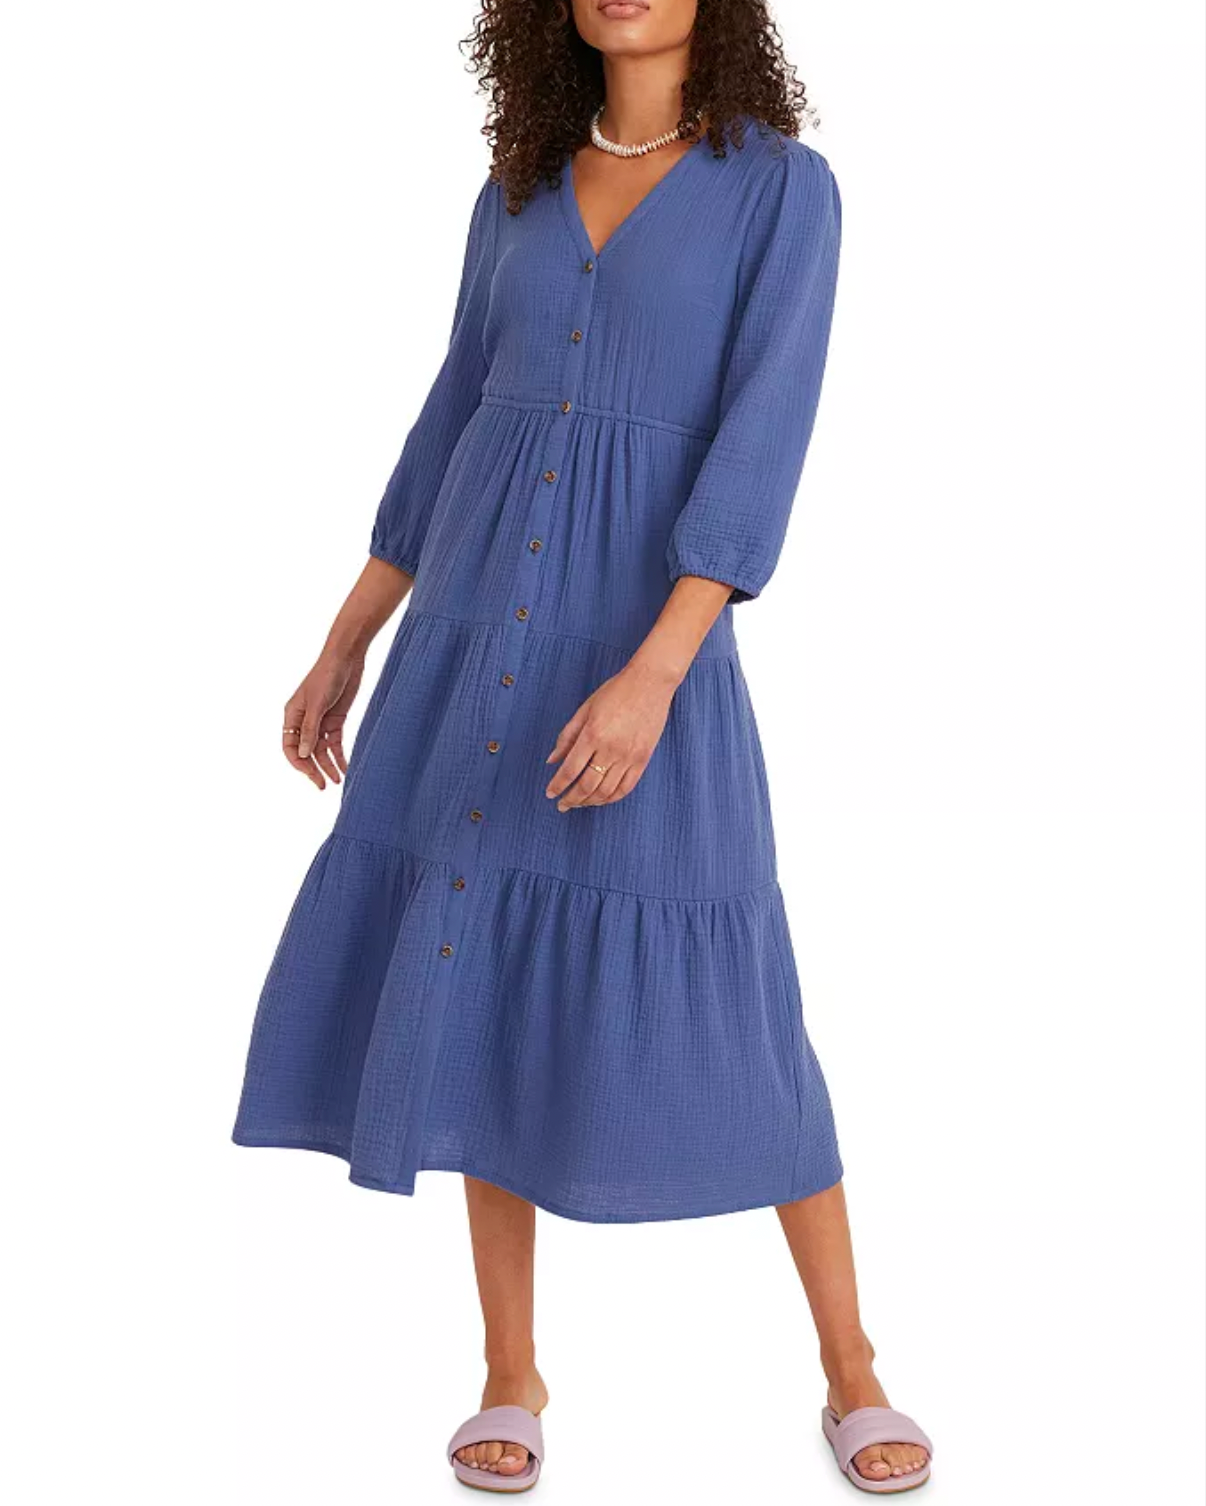 Model wearing Marine Layer Willow Doublecloth Midi Dress in Marine color standing behind a white background